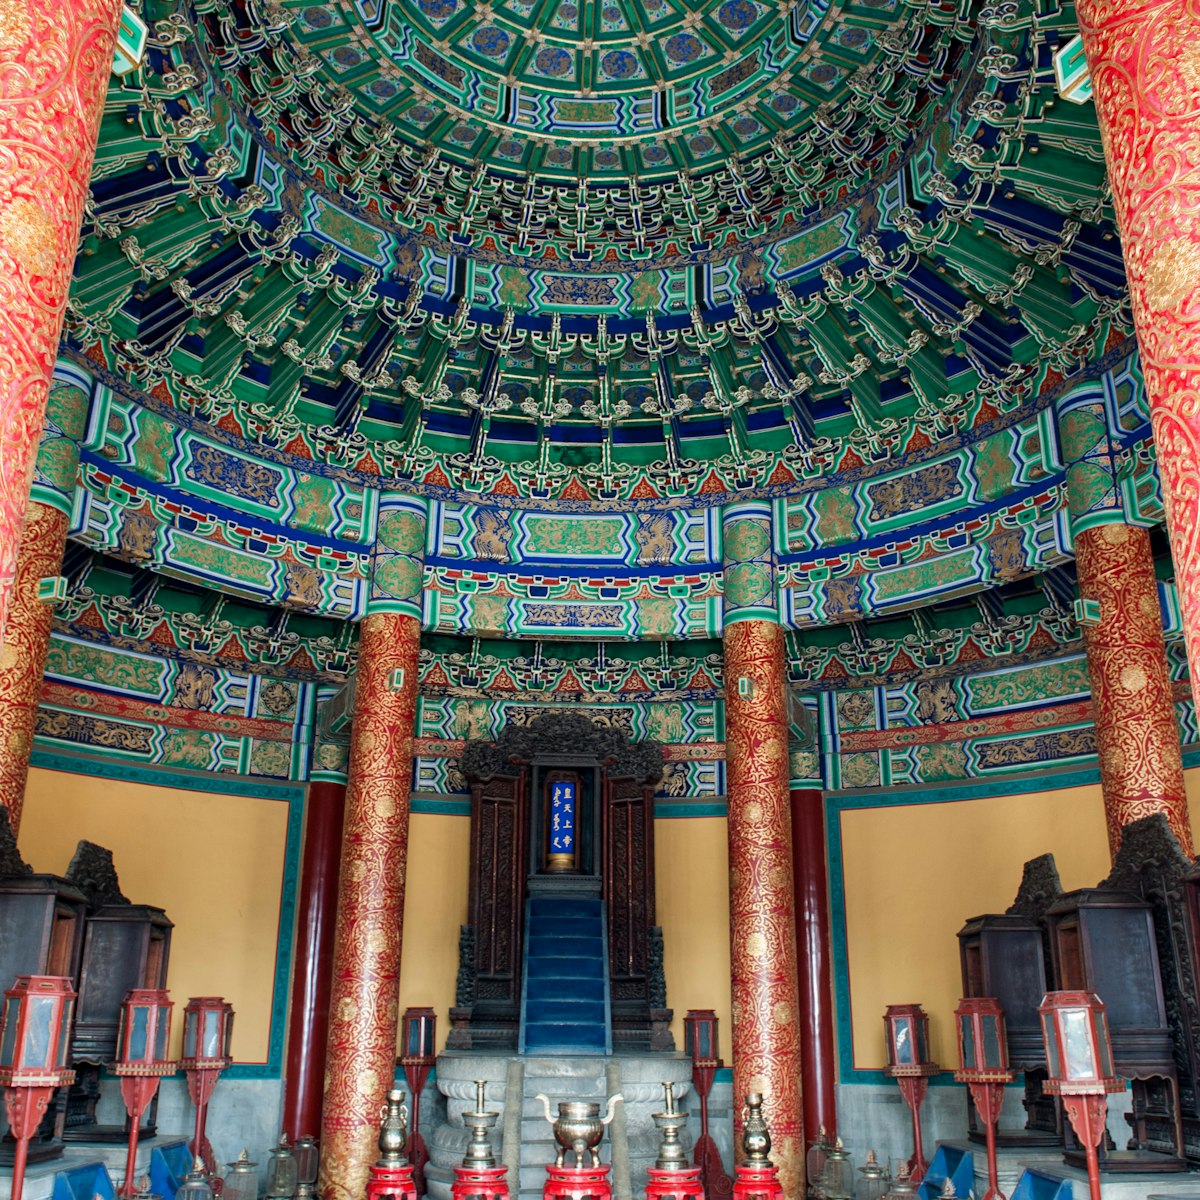 Inside the Imperial Vault of Heaven at the Temple of Heaven Park.
